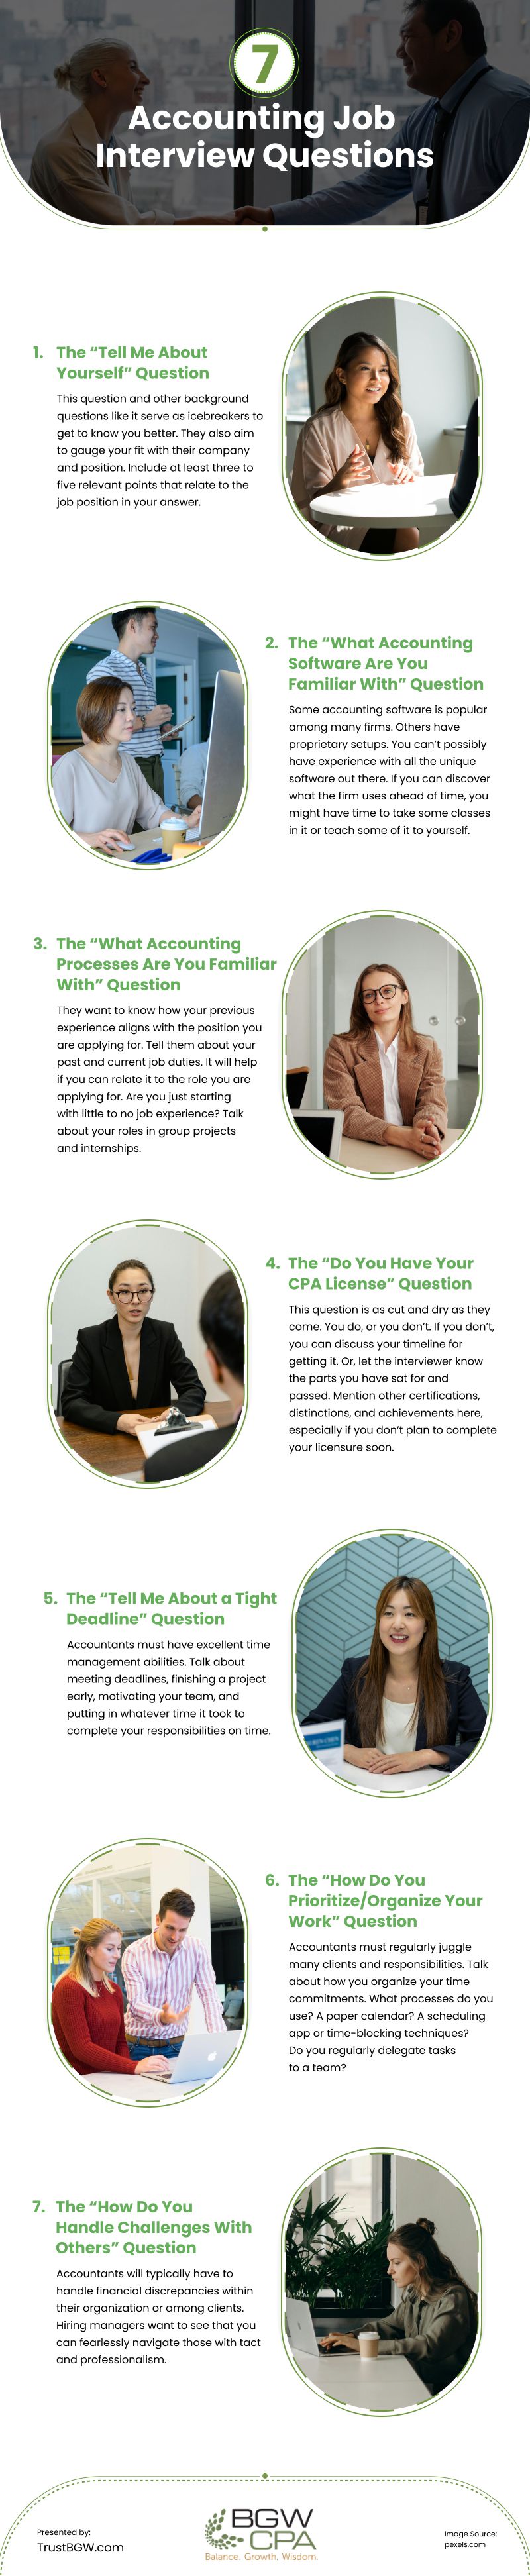 7 Accounting Job Interview Questions Infographic